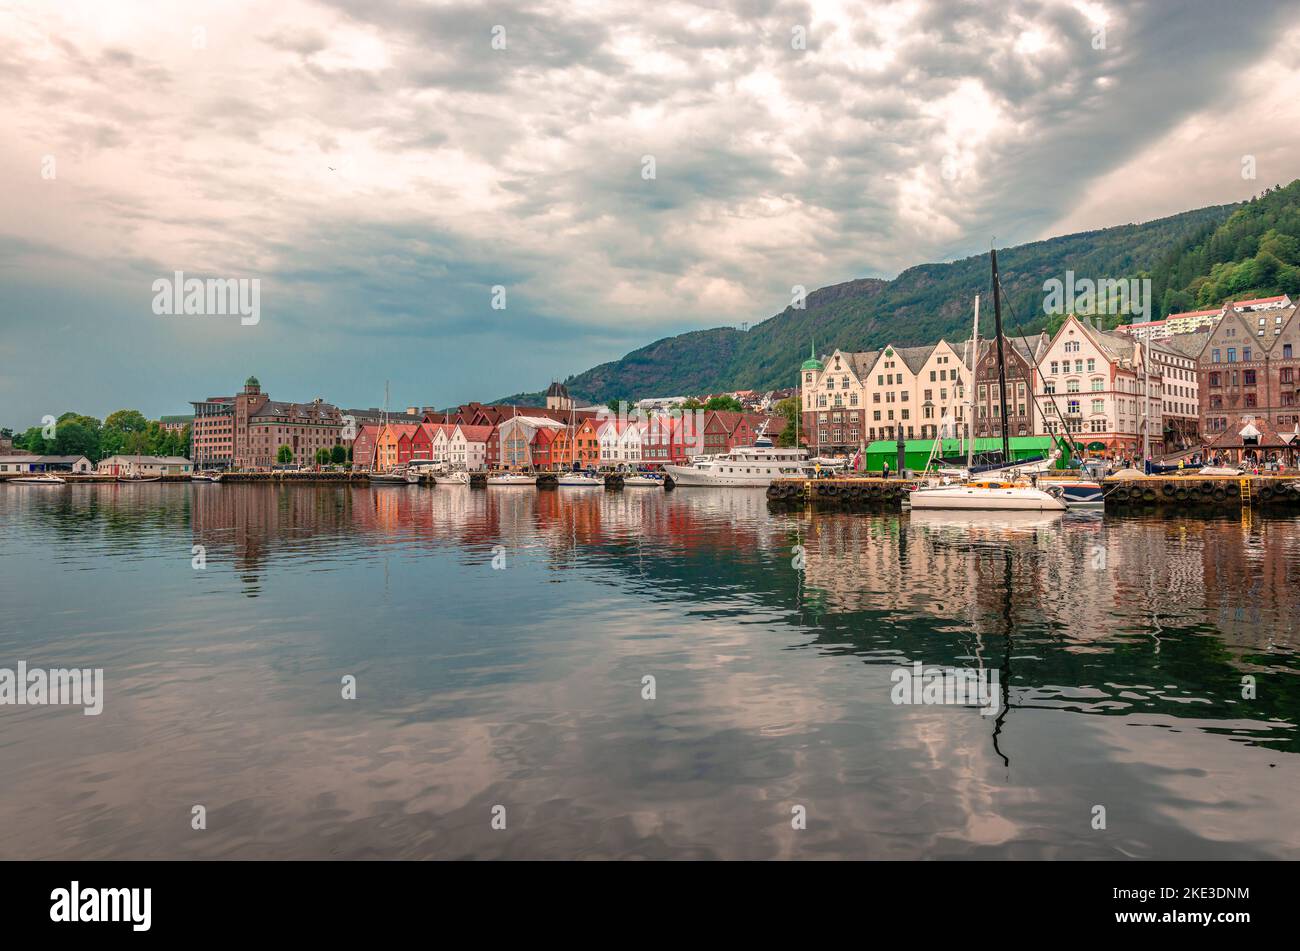 Bergen, Norway - August 15 2022: View of Bryggen, with the Hanseatic heritage commercial buildings lining up the eastern side of the harbour. Stock Photo